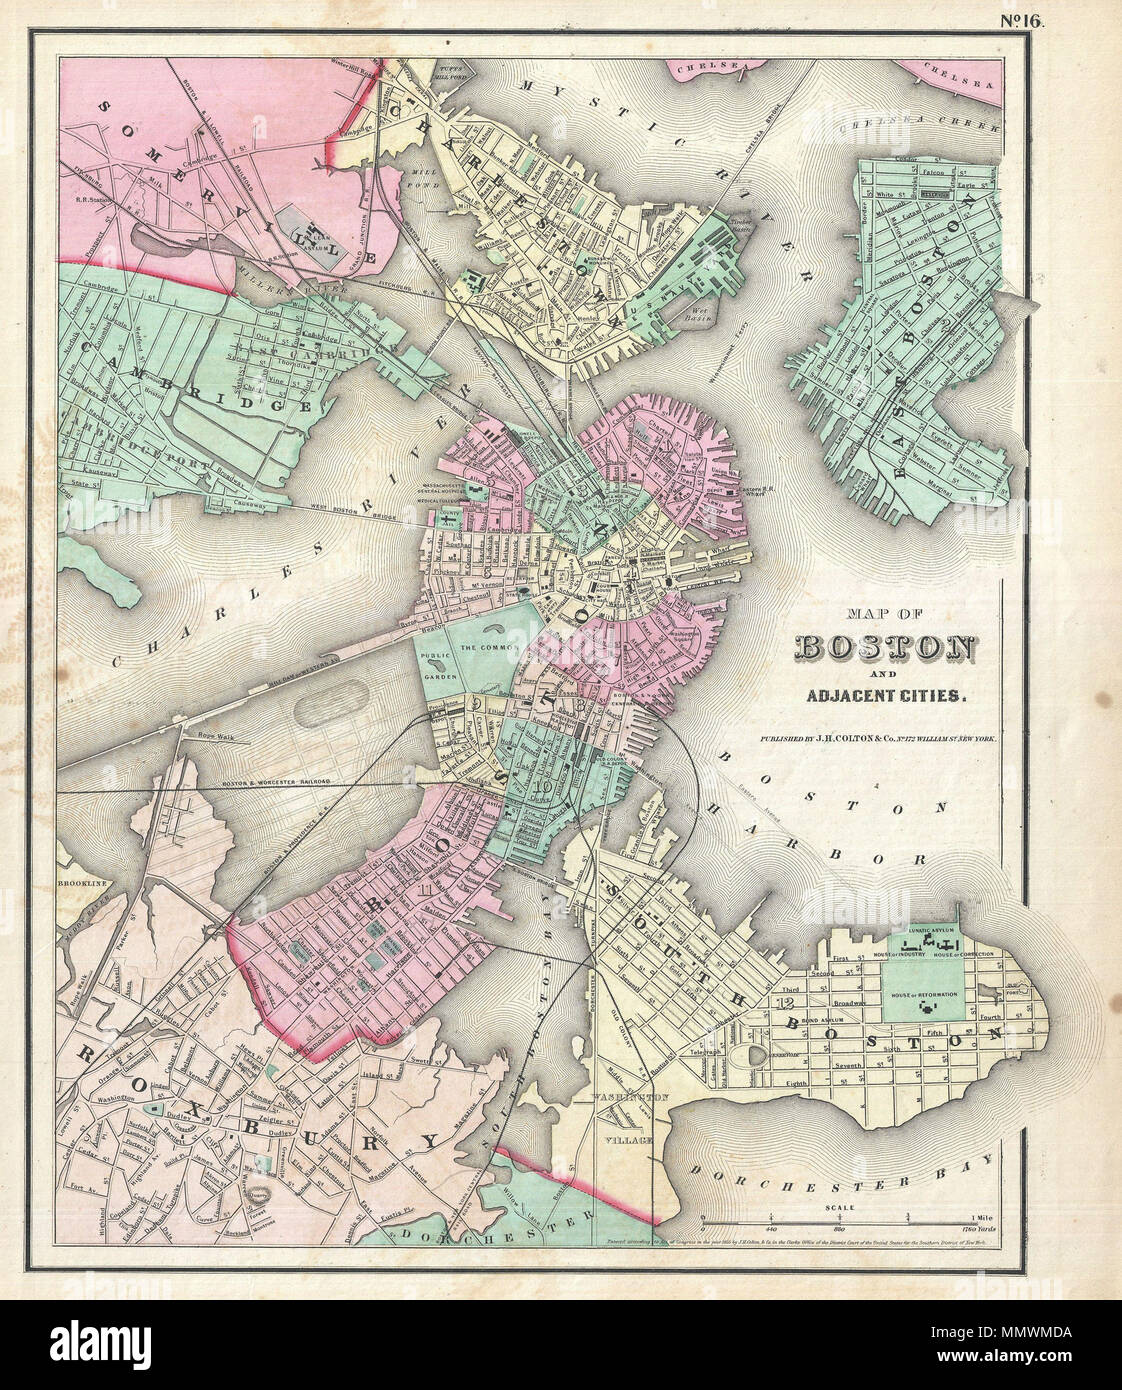 .  English: An excellent 1857 example of Colton's map of Boston, Massachusetts. Includes the surrounding communities of Cambridge, Summerville, Charleston, East Boston, South Boston and Roxbury. Hand colored in pink, green, yellow and blue pastels with considerable detail at level of individual streets and buildings. This is an exceptionally interesting and important map of Boston issued just prior to the Back Bay land reclamation projection. The street and avenue grid is ghosted-in in anticipation of this enormous urban development project. Modern residents of the Back Bay may still recognize Stock Photo